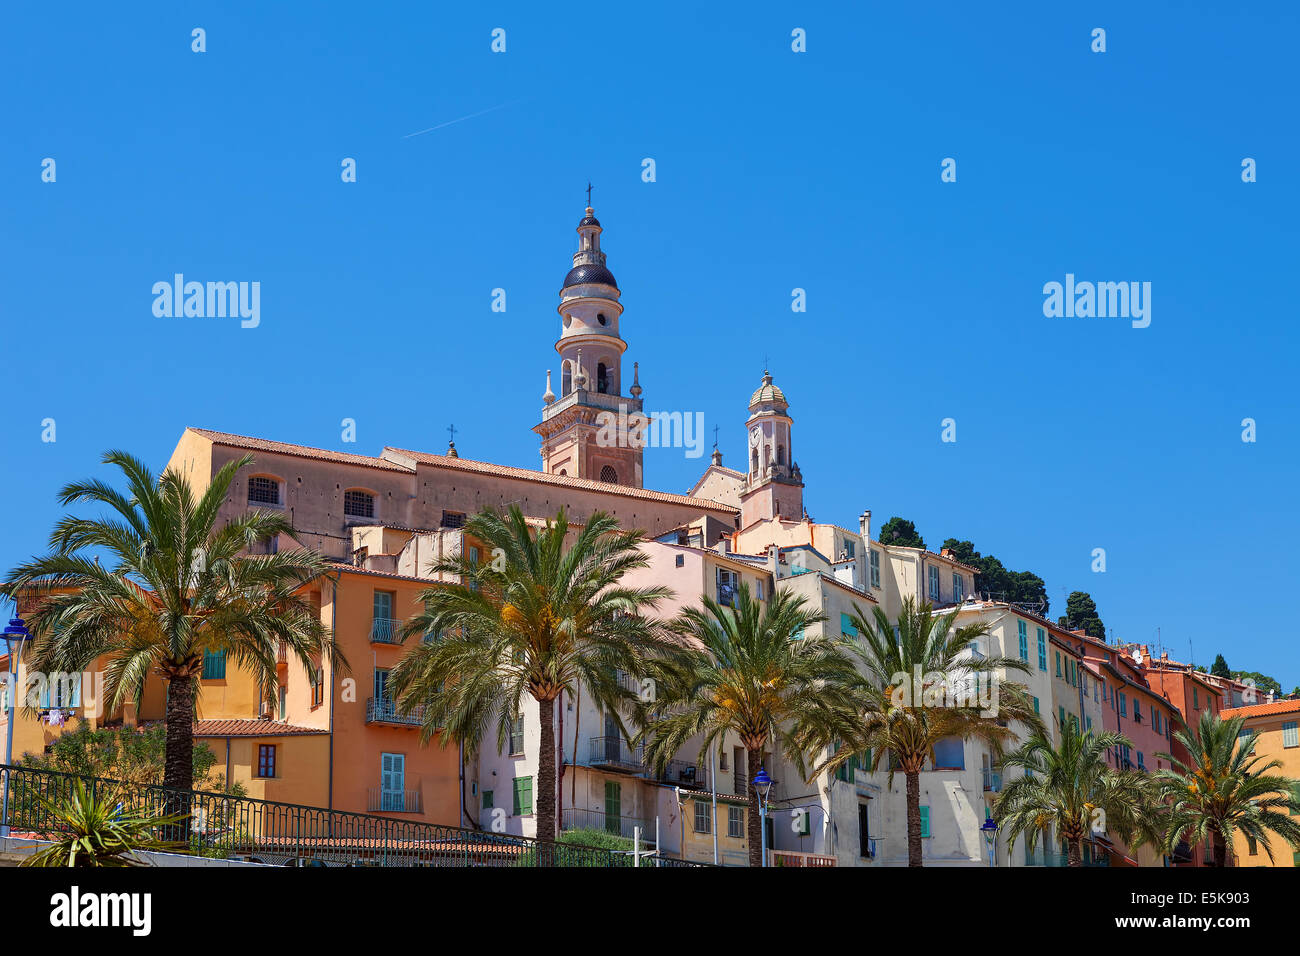 Bell tower among colorful houses under blue sky in Menton, France. Stock Photo